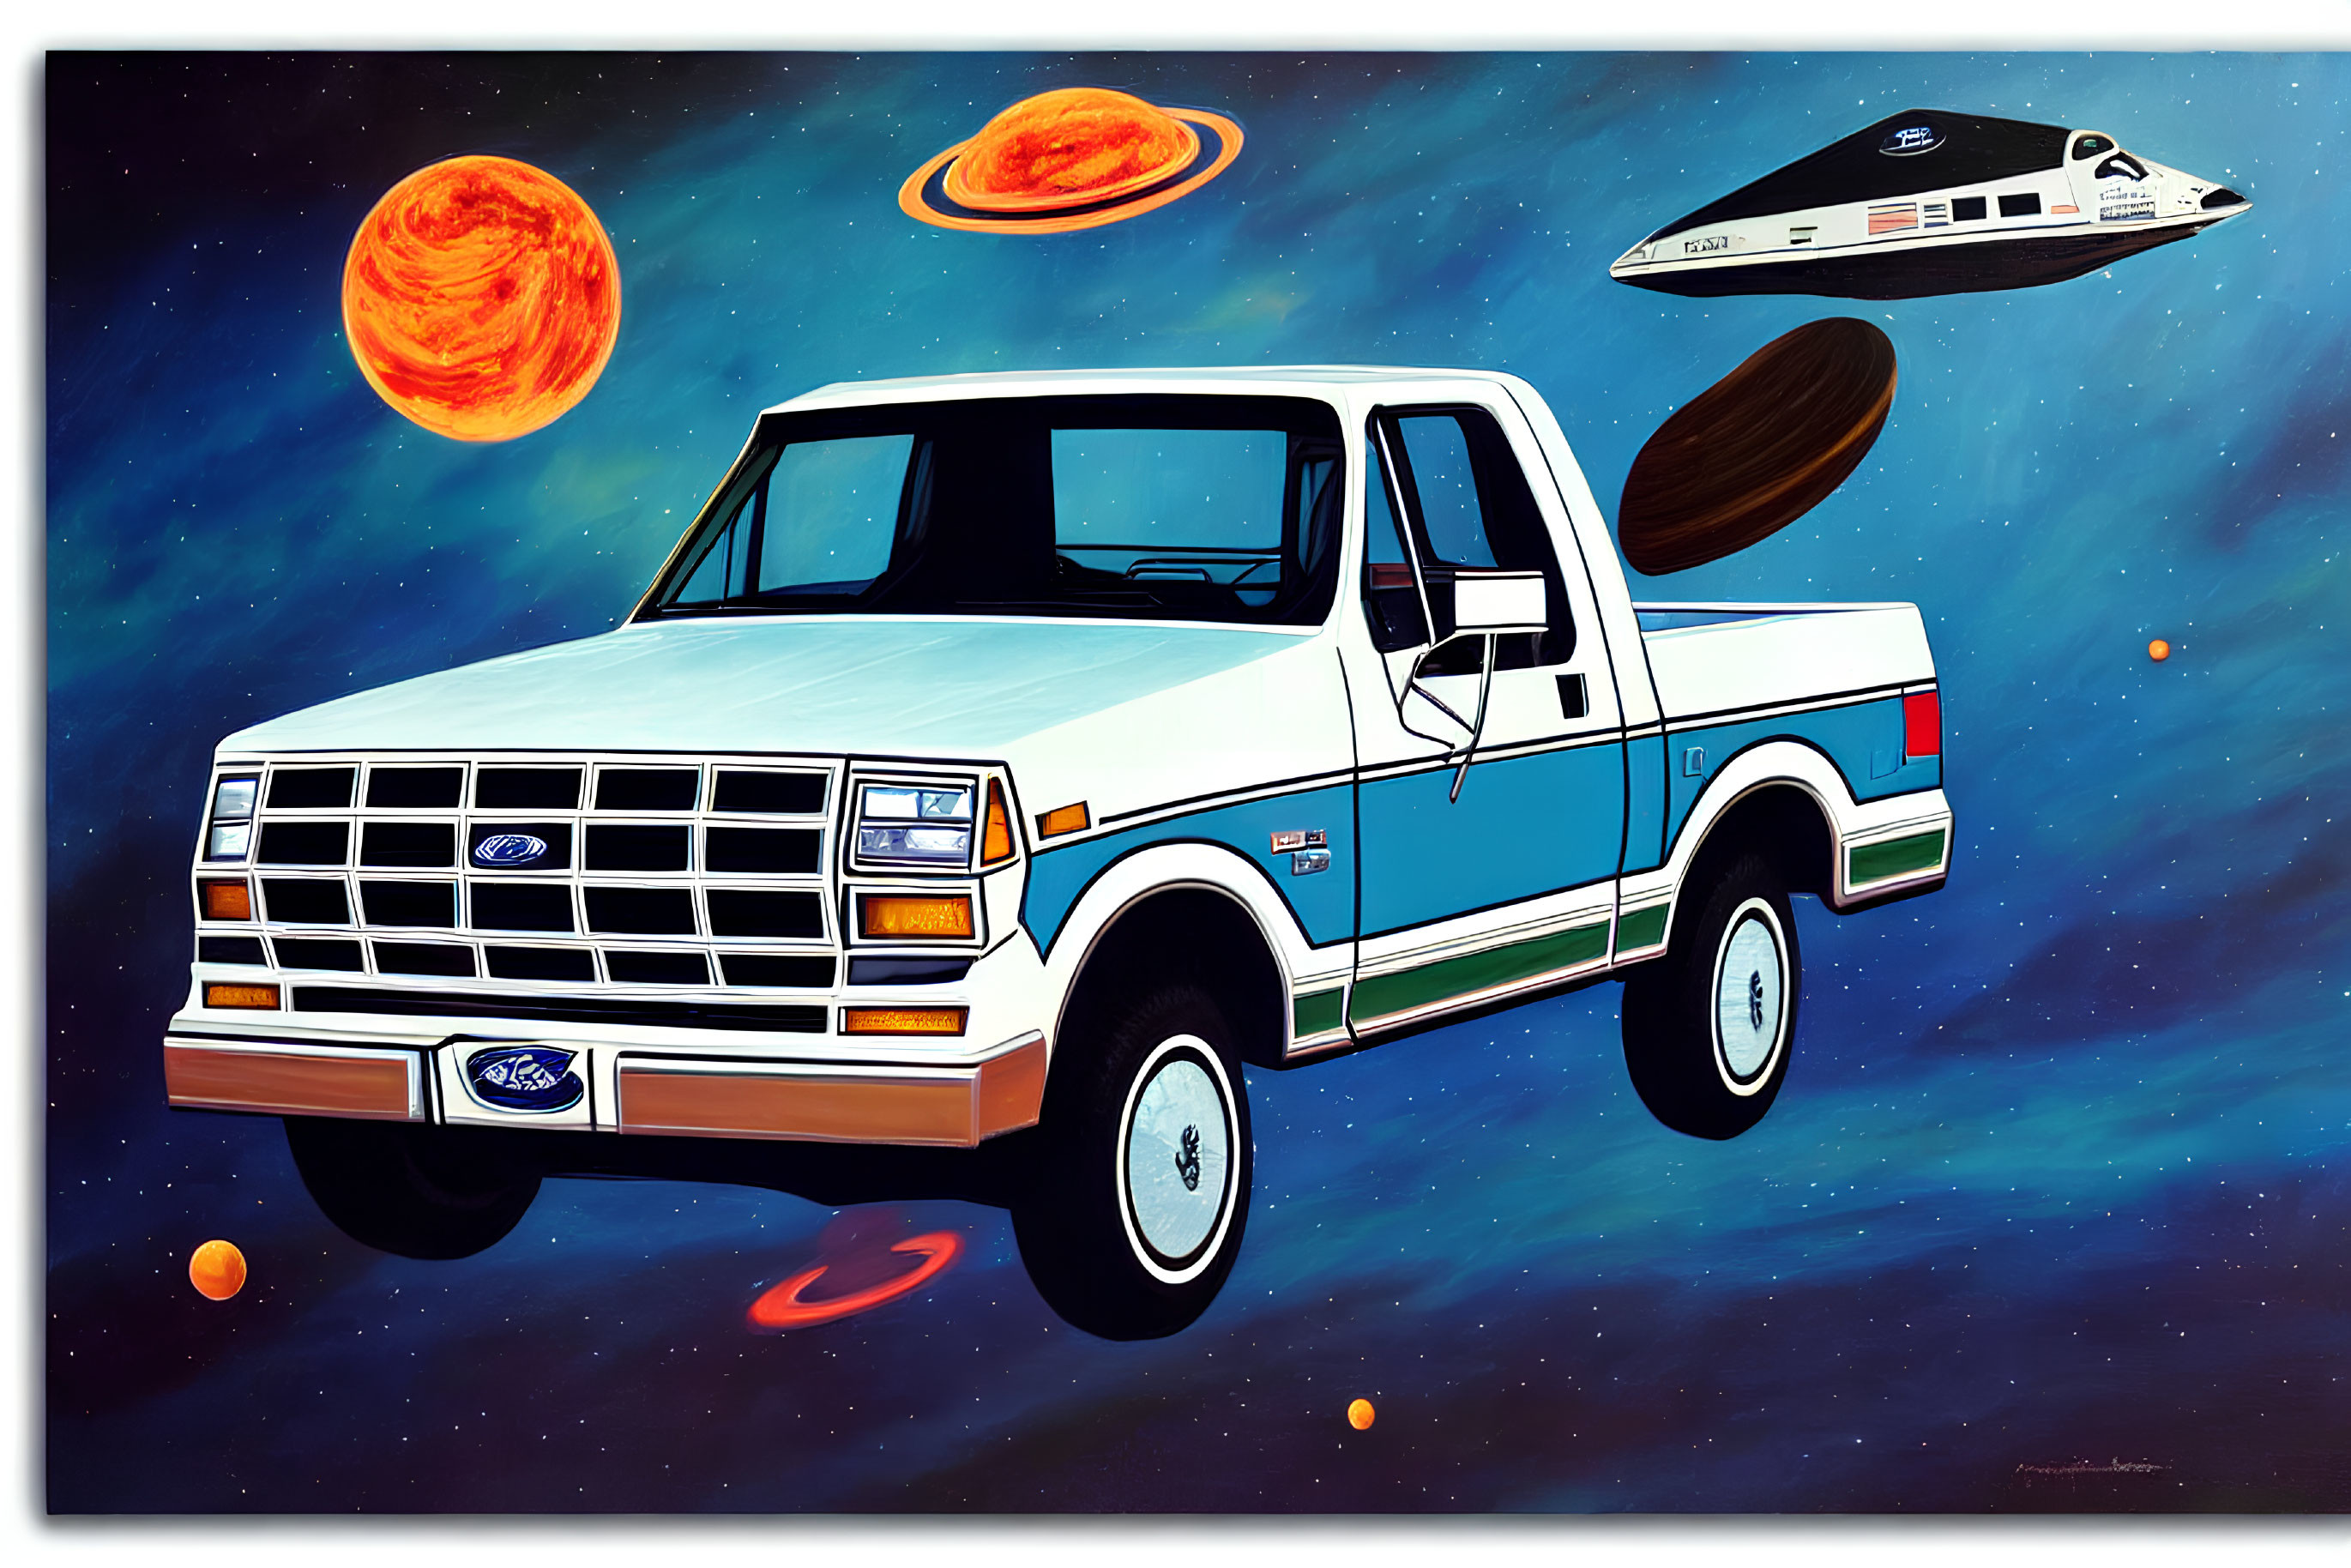 Vintage Ford pickup truck in space with planets and spaceship.